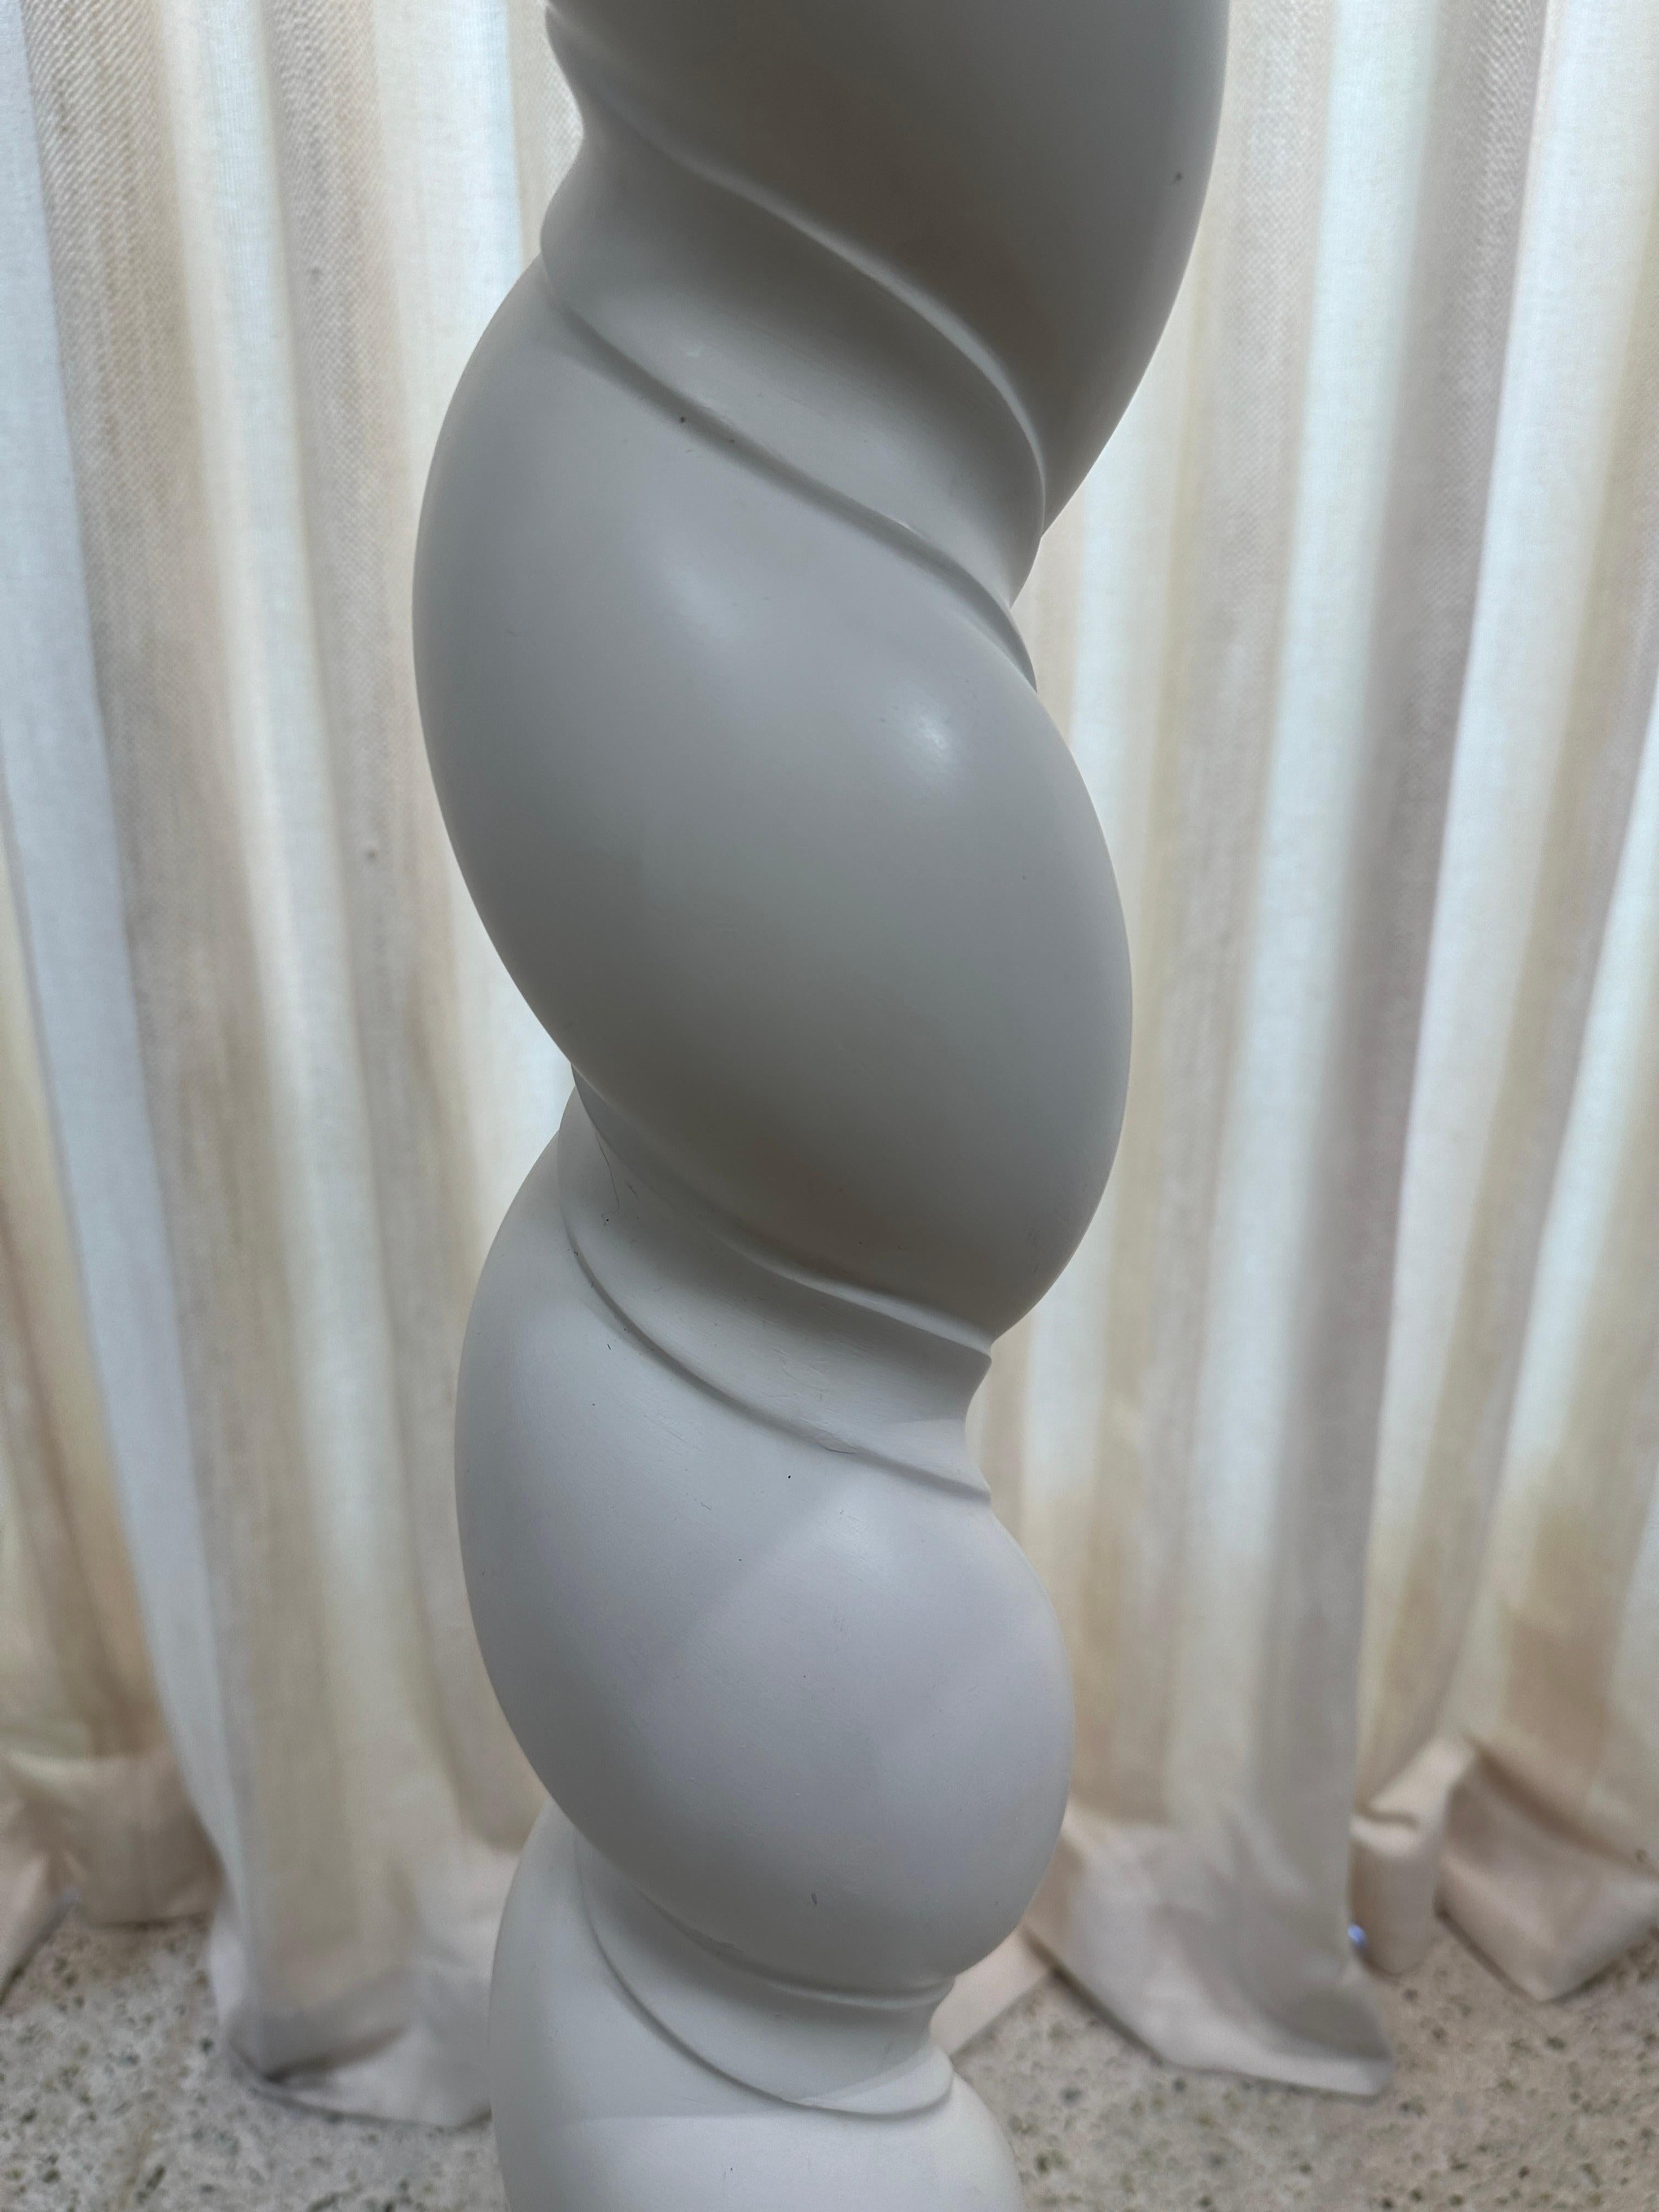 Extremely Rare Composition Plaster Floor Lamp w/ Spiraling Design by Sirmos For Sale 2